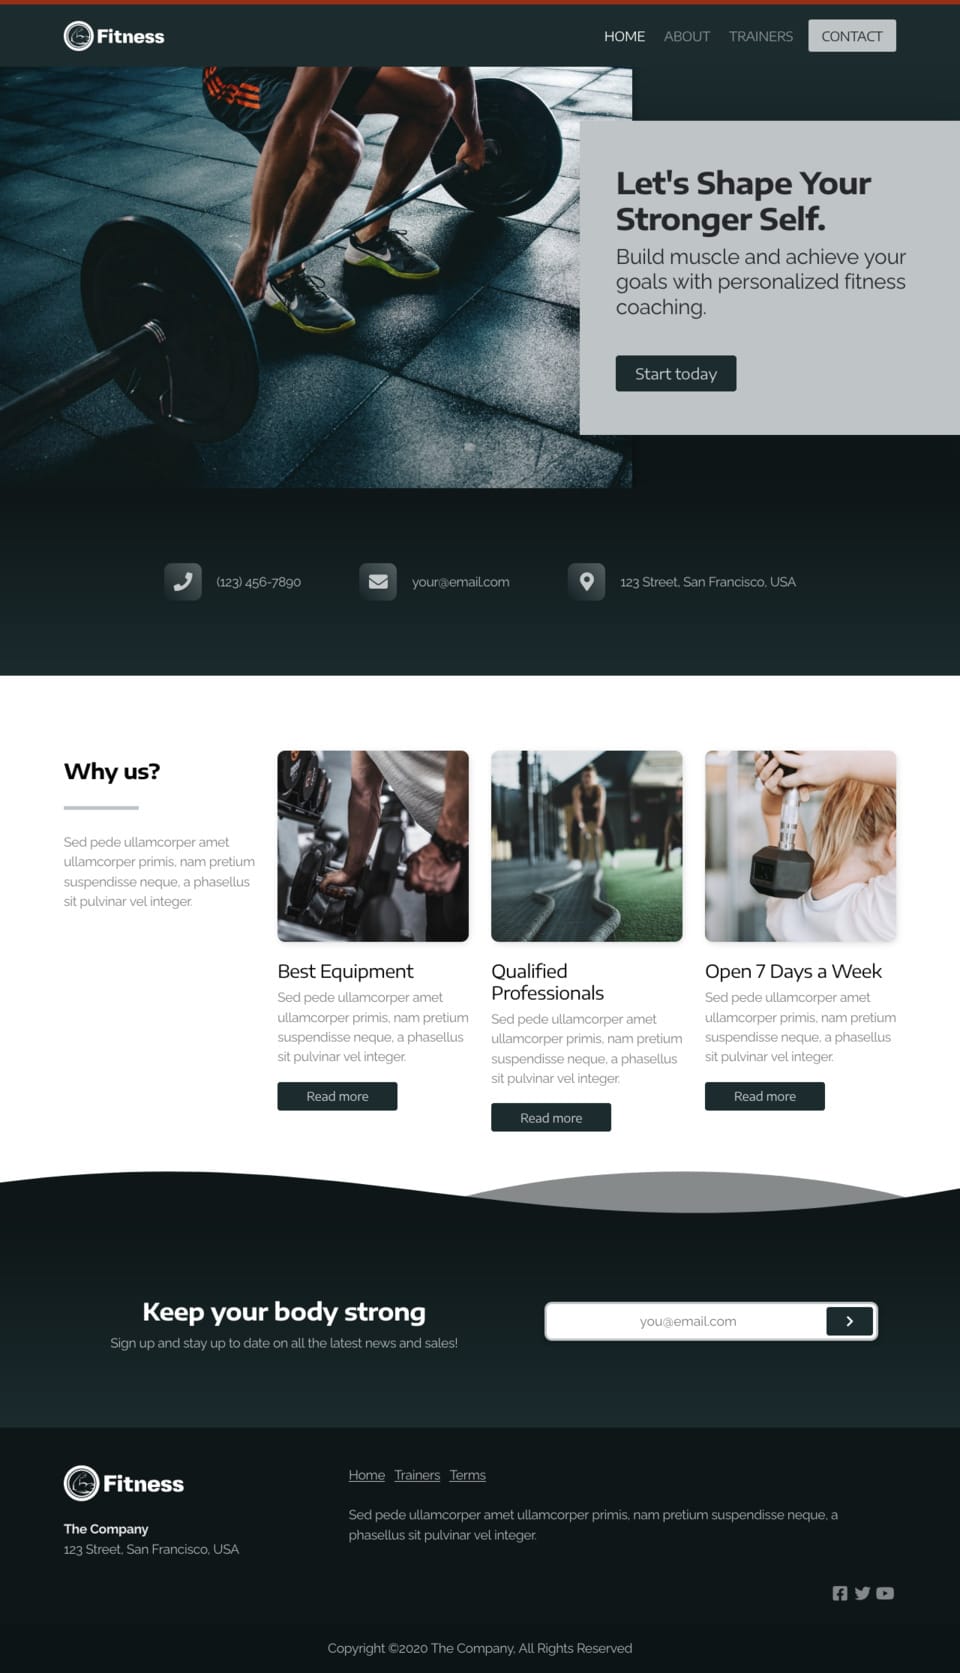 Fitness Website Template - Ideal for small businesses in the fitness industry looking to establish their online presence.